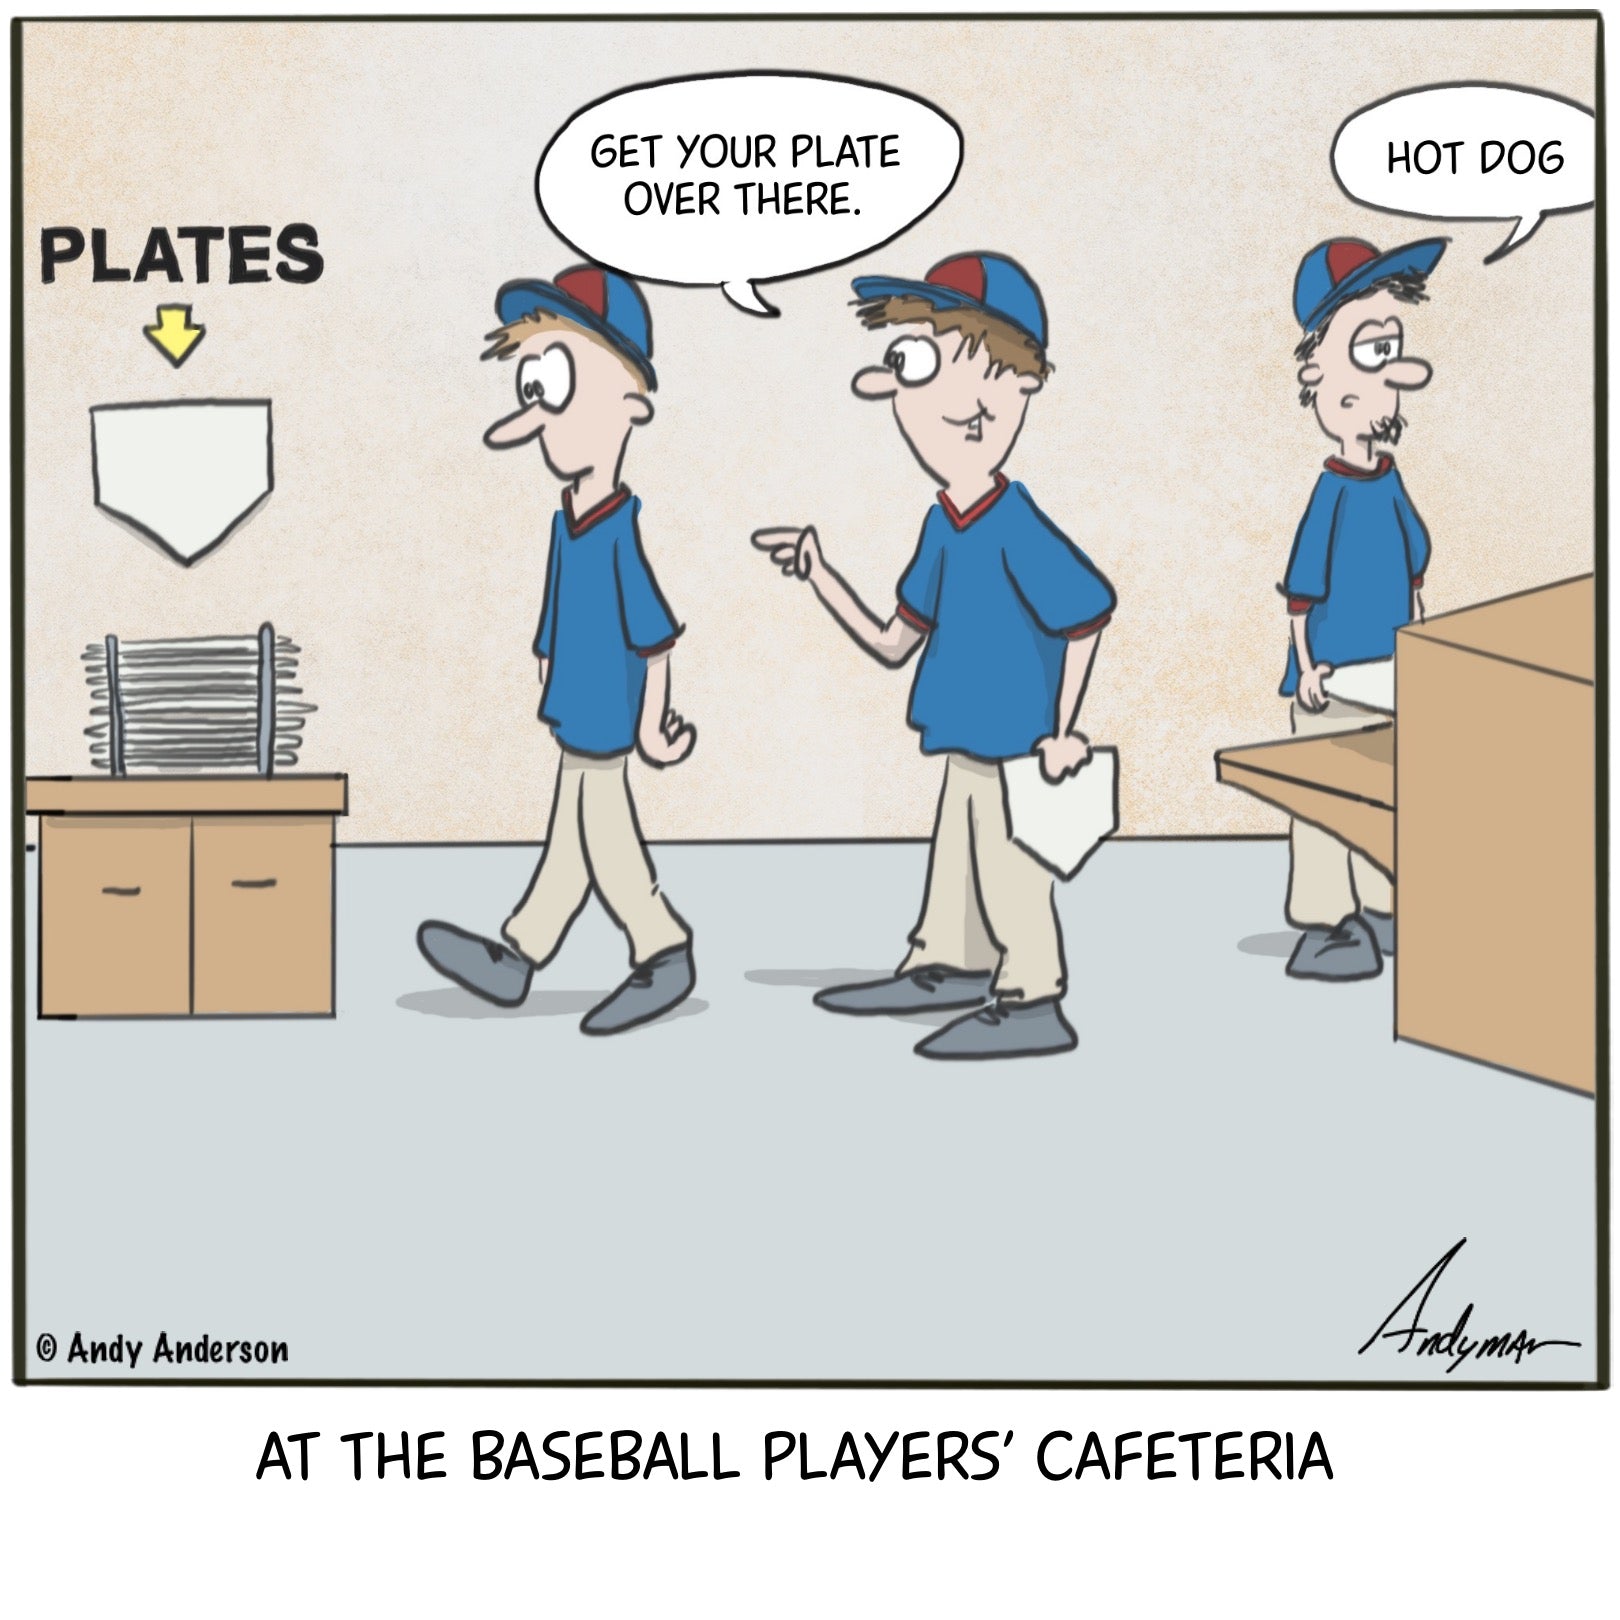 At the baseball players’ cafeteria cartoon by Andy Anderson